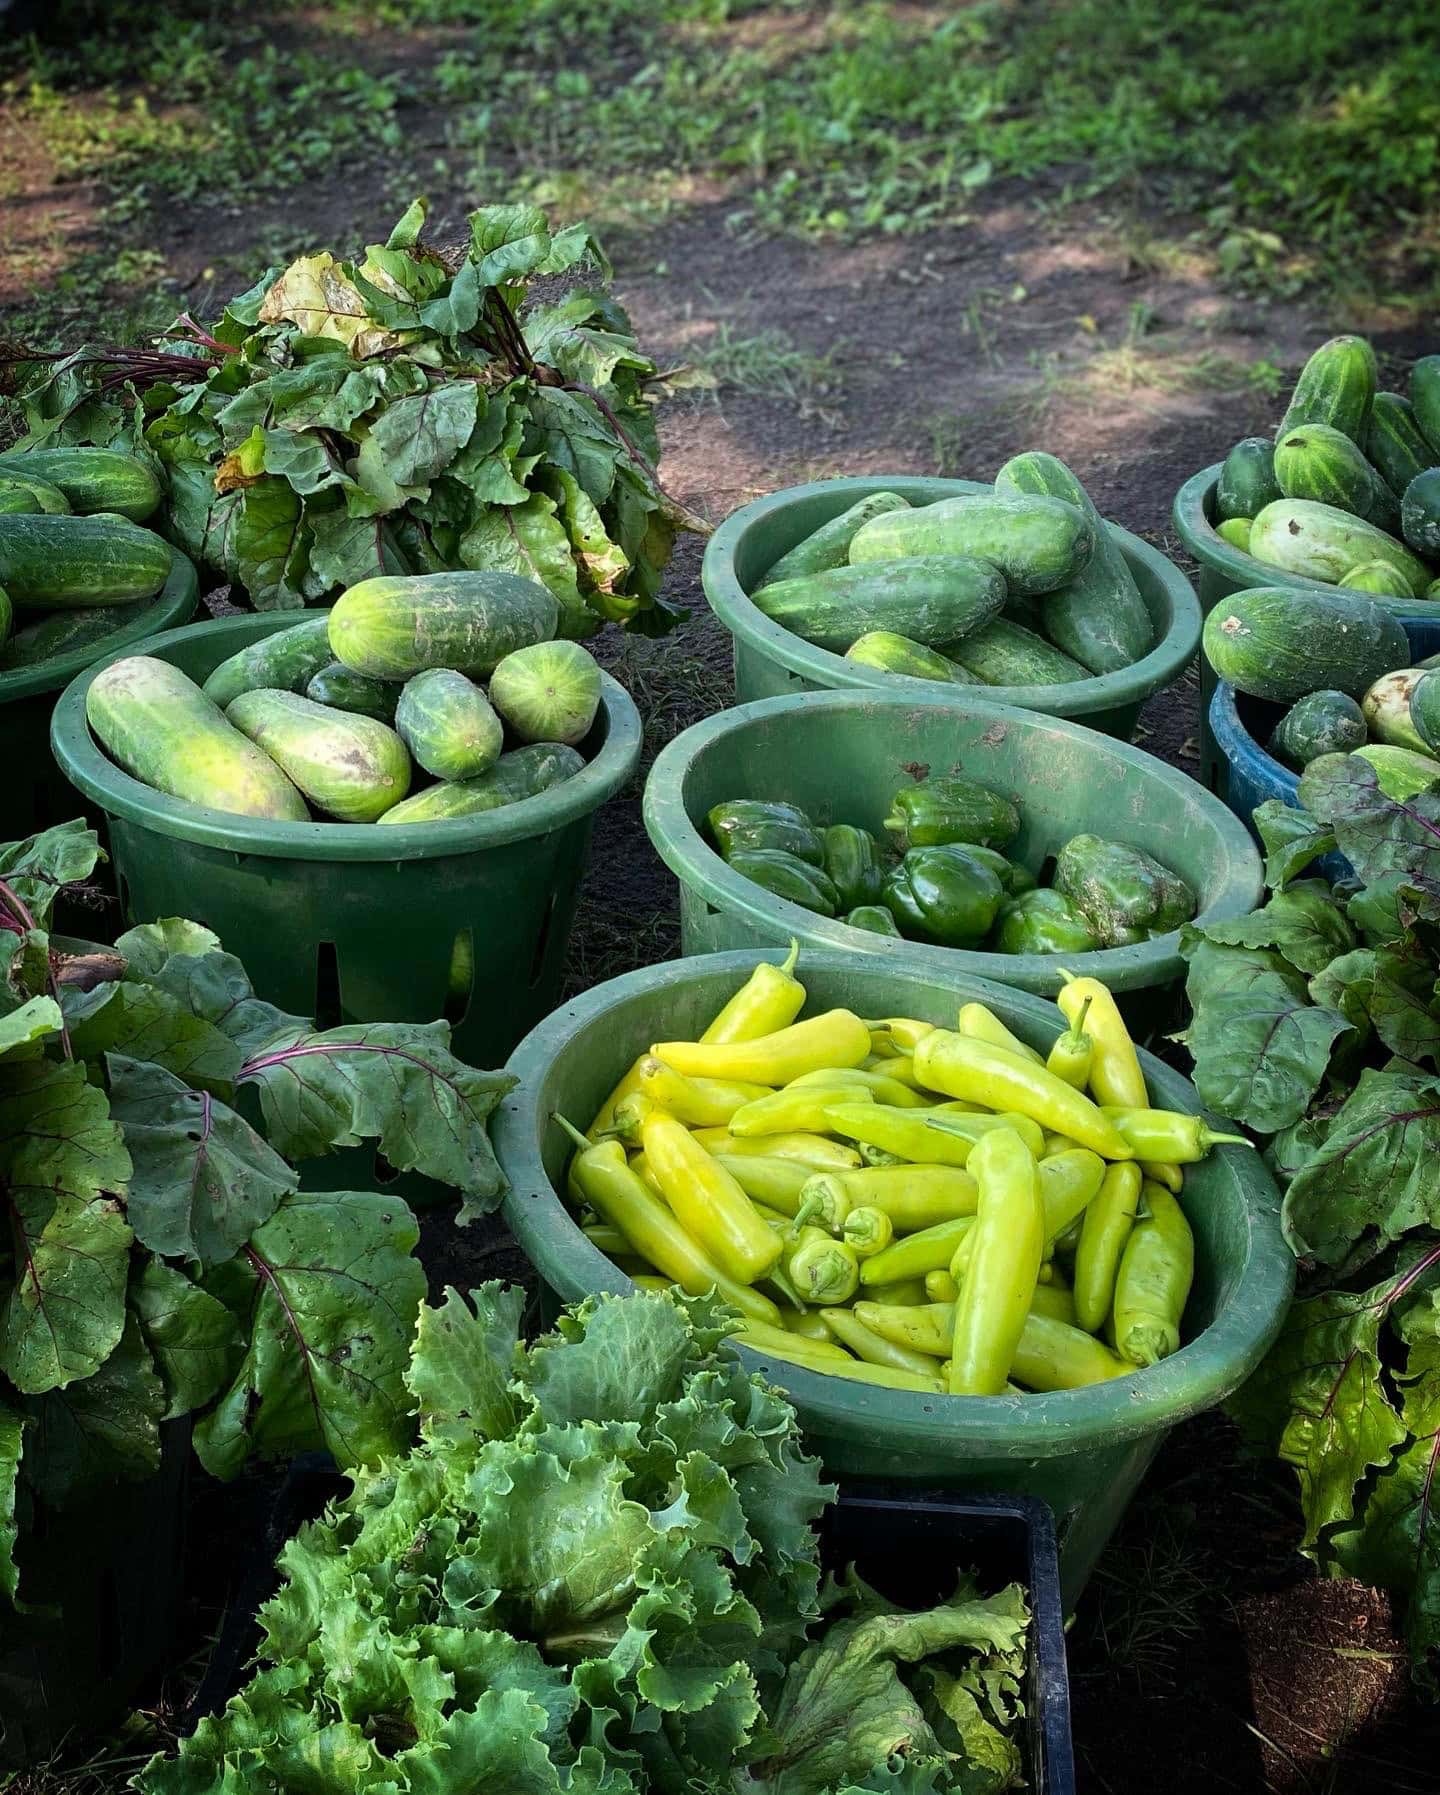 Multiple buckets of zucchini and peppers from a garden.